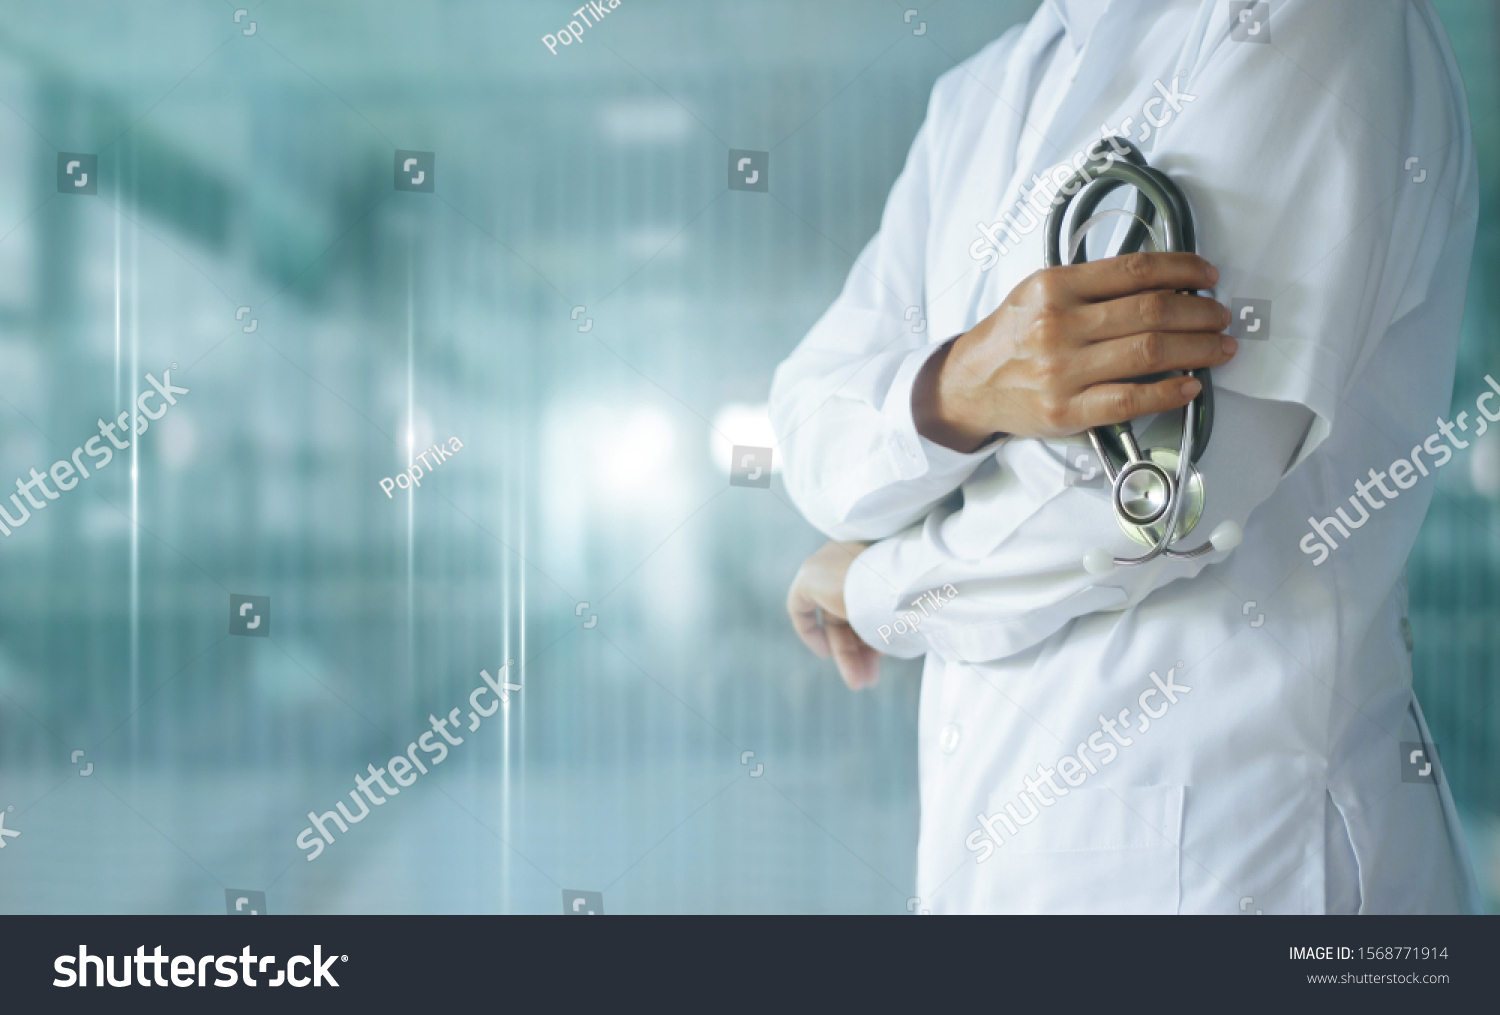 Medicine doctor with stethoscope in hand on hospital background,  Medical technology, Healthcare and Medical concept. #1568771914